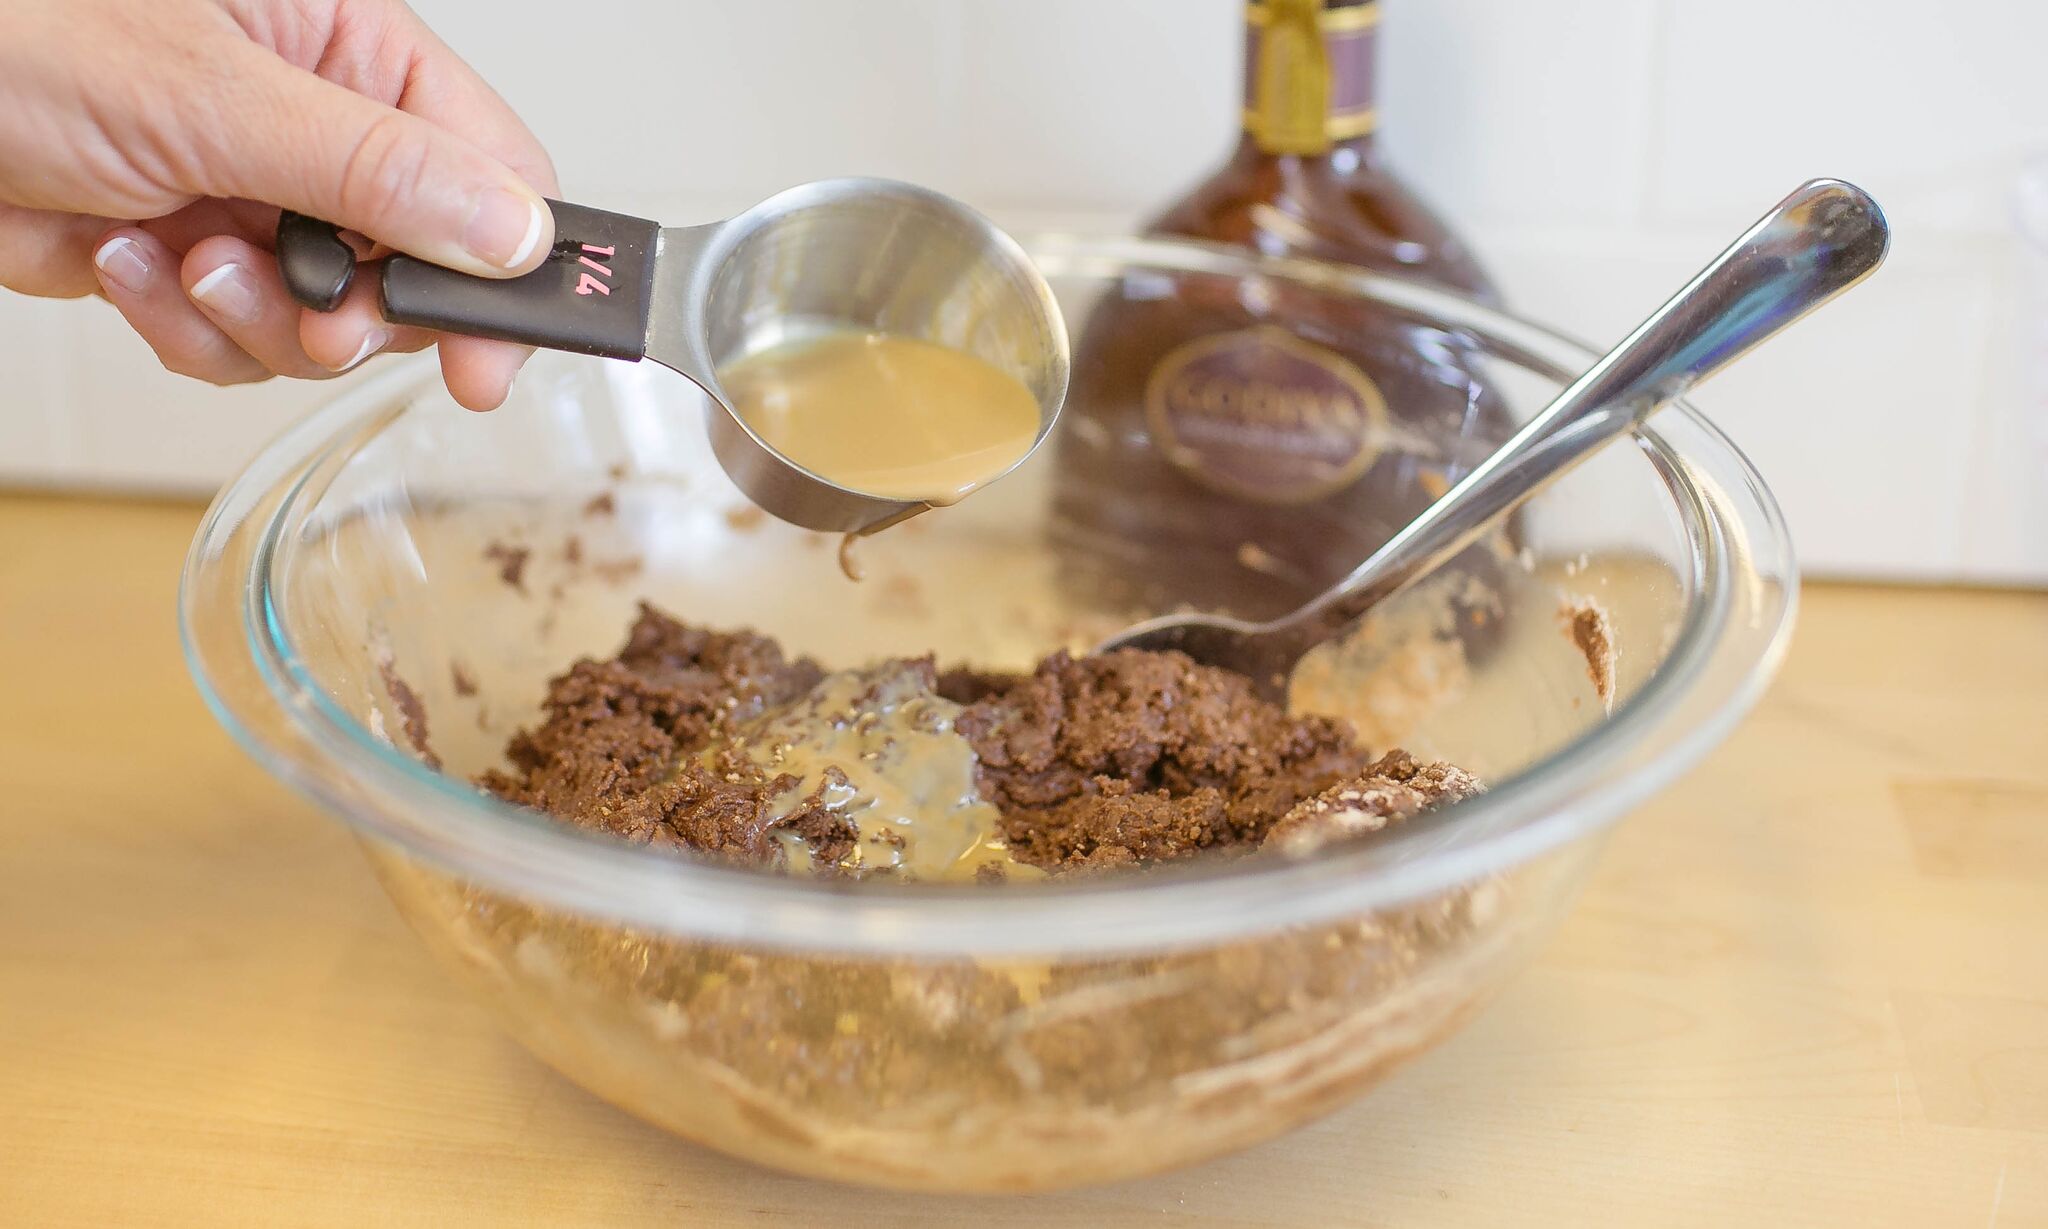 Prepare brownie mixture according to box instructions and replace water with the Godiva liqueur.